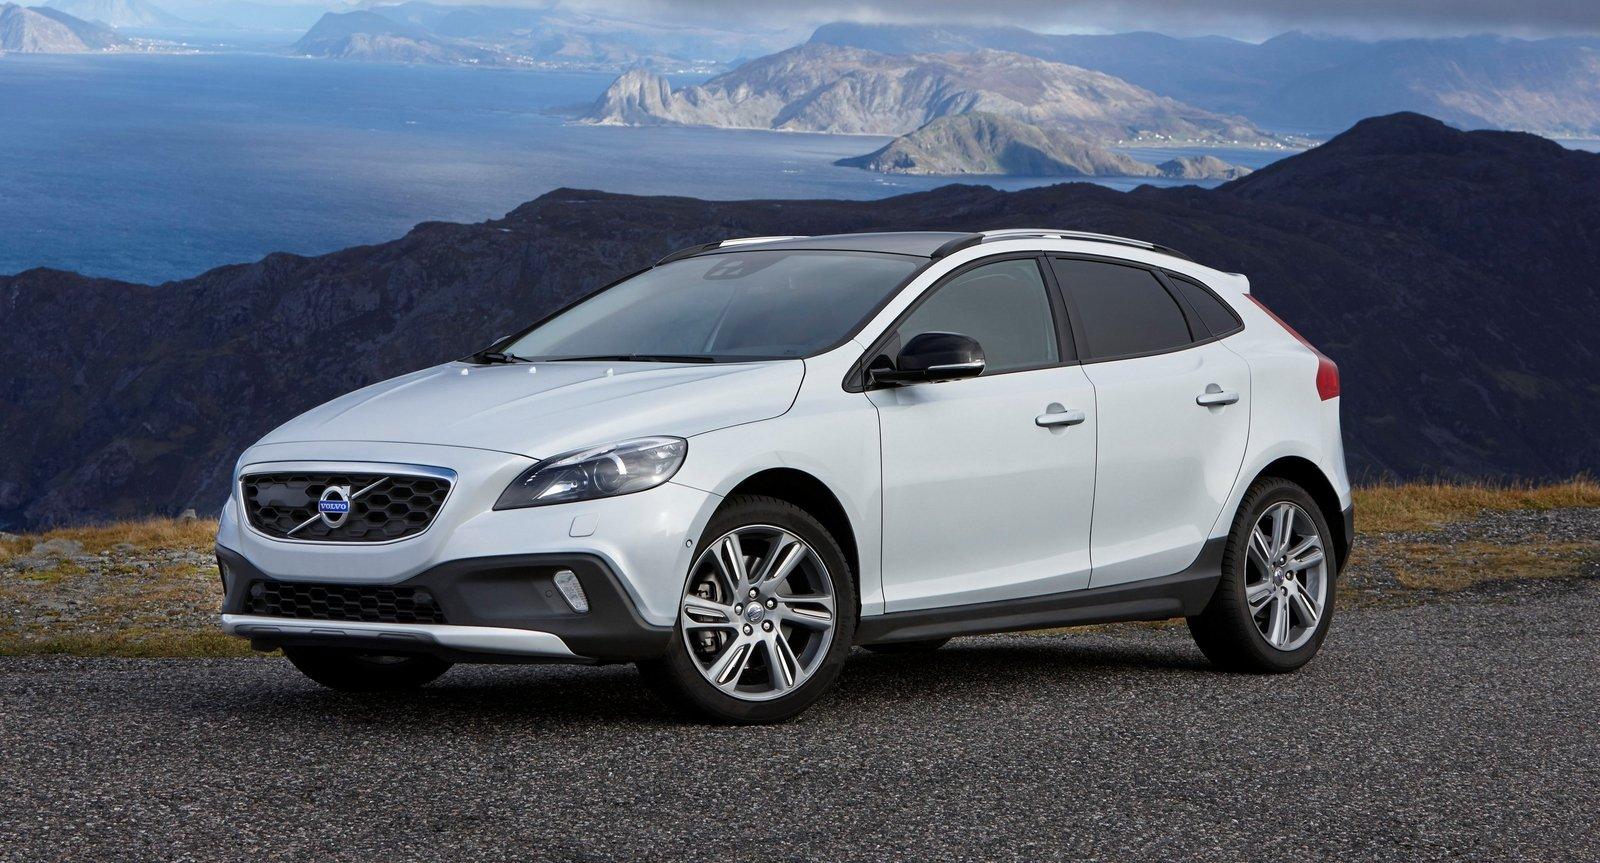 2015 Volvo V40 Cross Country Picture, Photo, Wallpaper